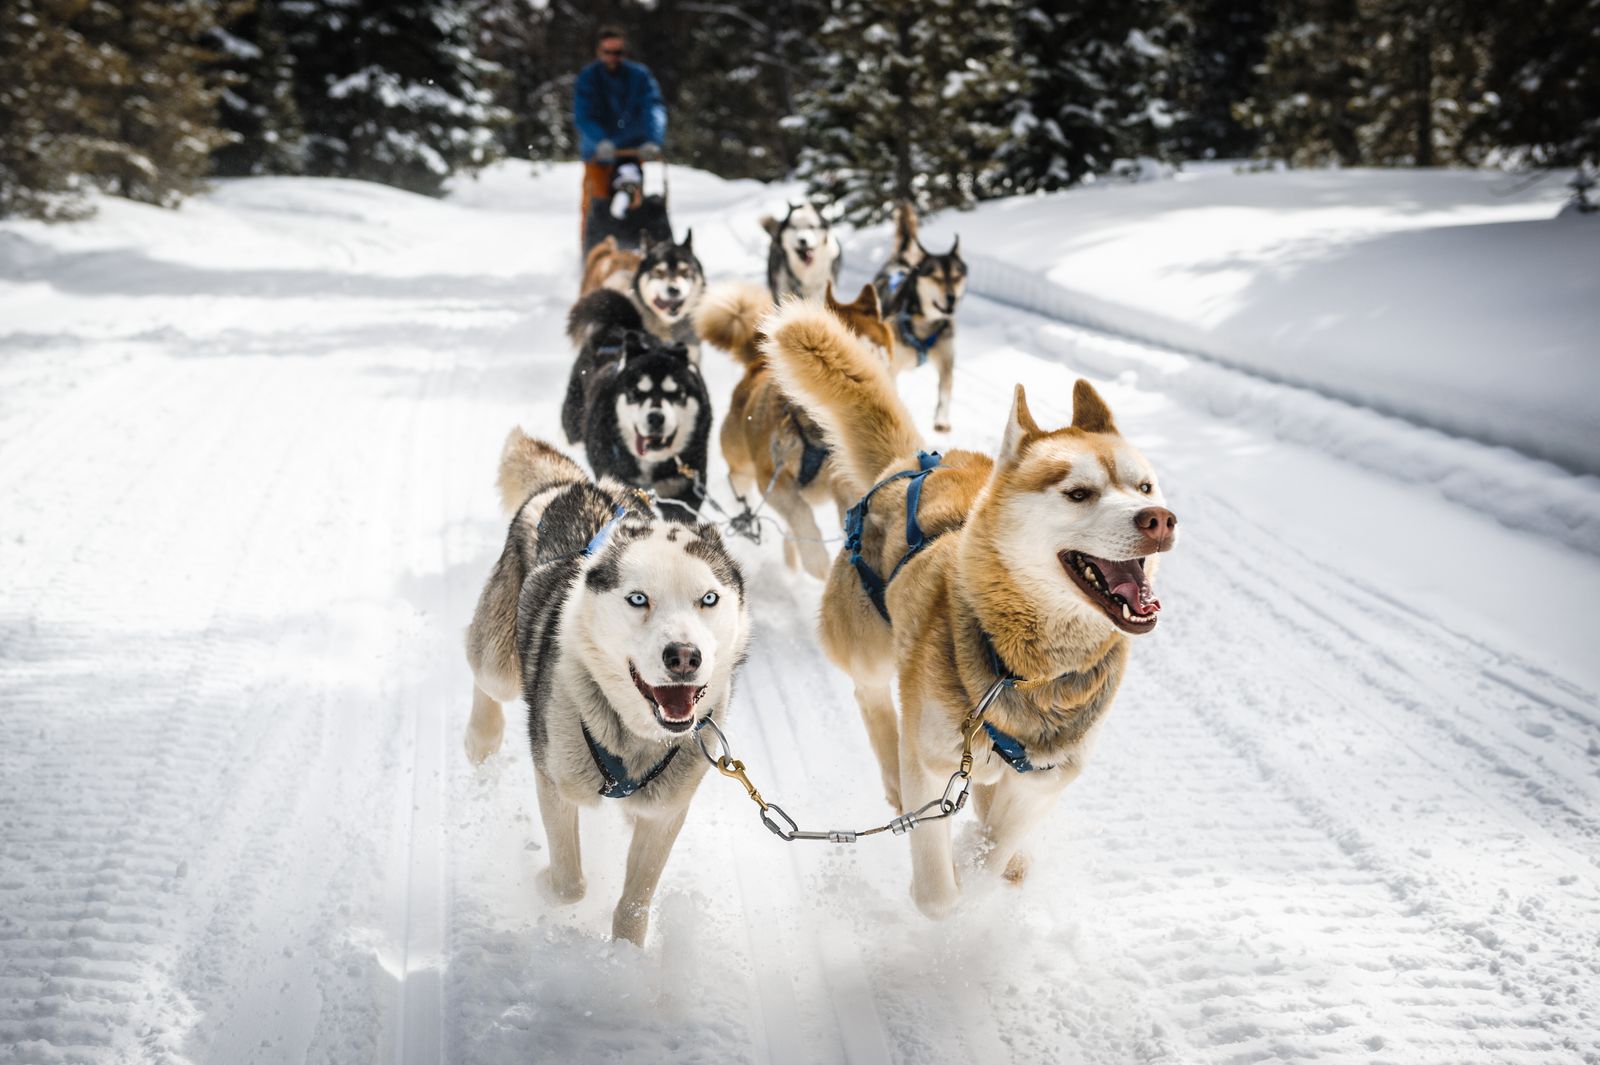 Six huskies pulling a sled along in the snow in Oregon.